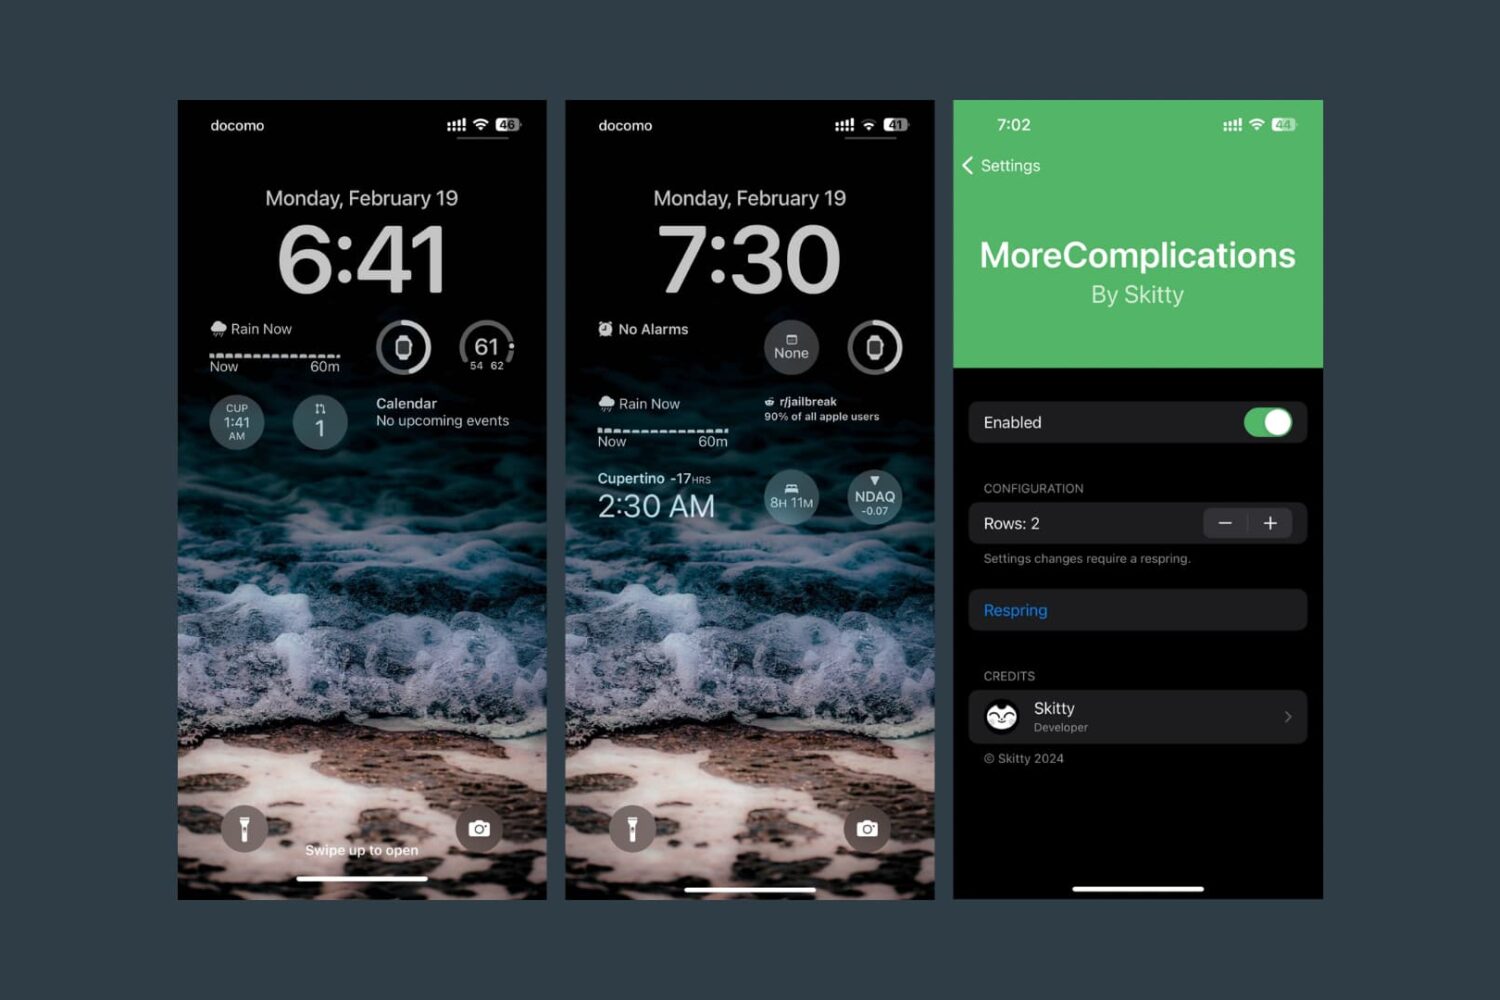 MoreComplicatioks adds more widget rows to the iOS 16 Lock Screen.